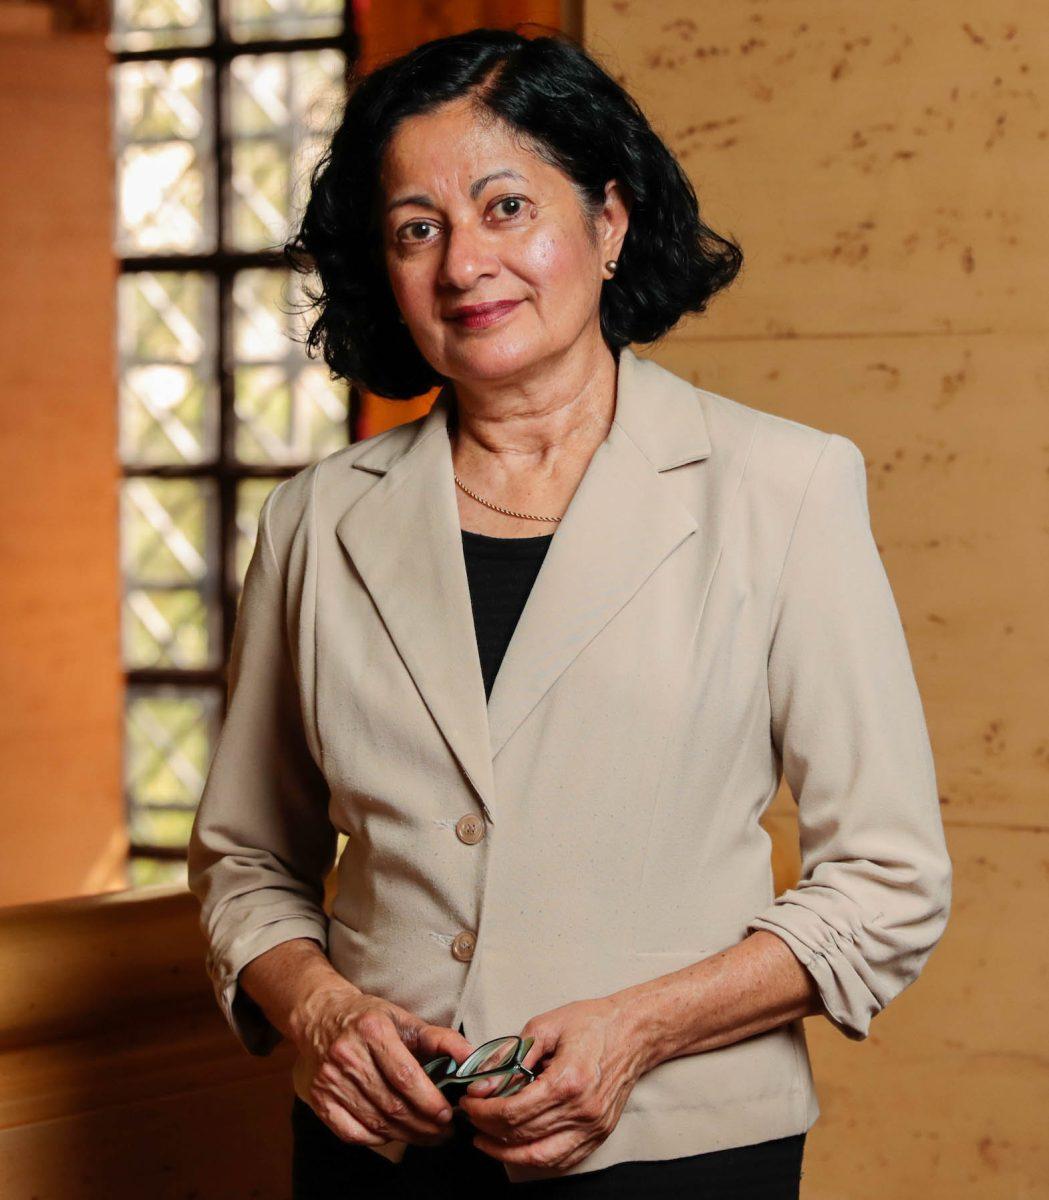 Texas A&M Liberal Arts professor Jyotsna Vaid has been recognized for her accomplishments and work as a women faculty member by receiving the Eminent Scholar Award.